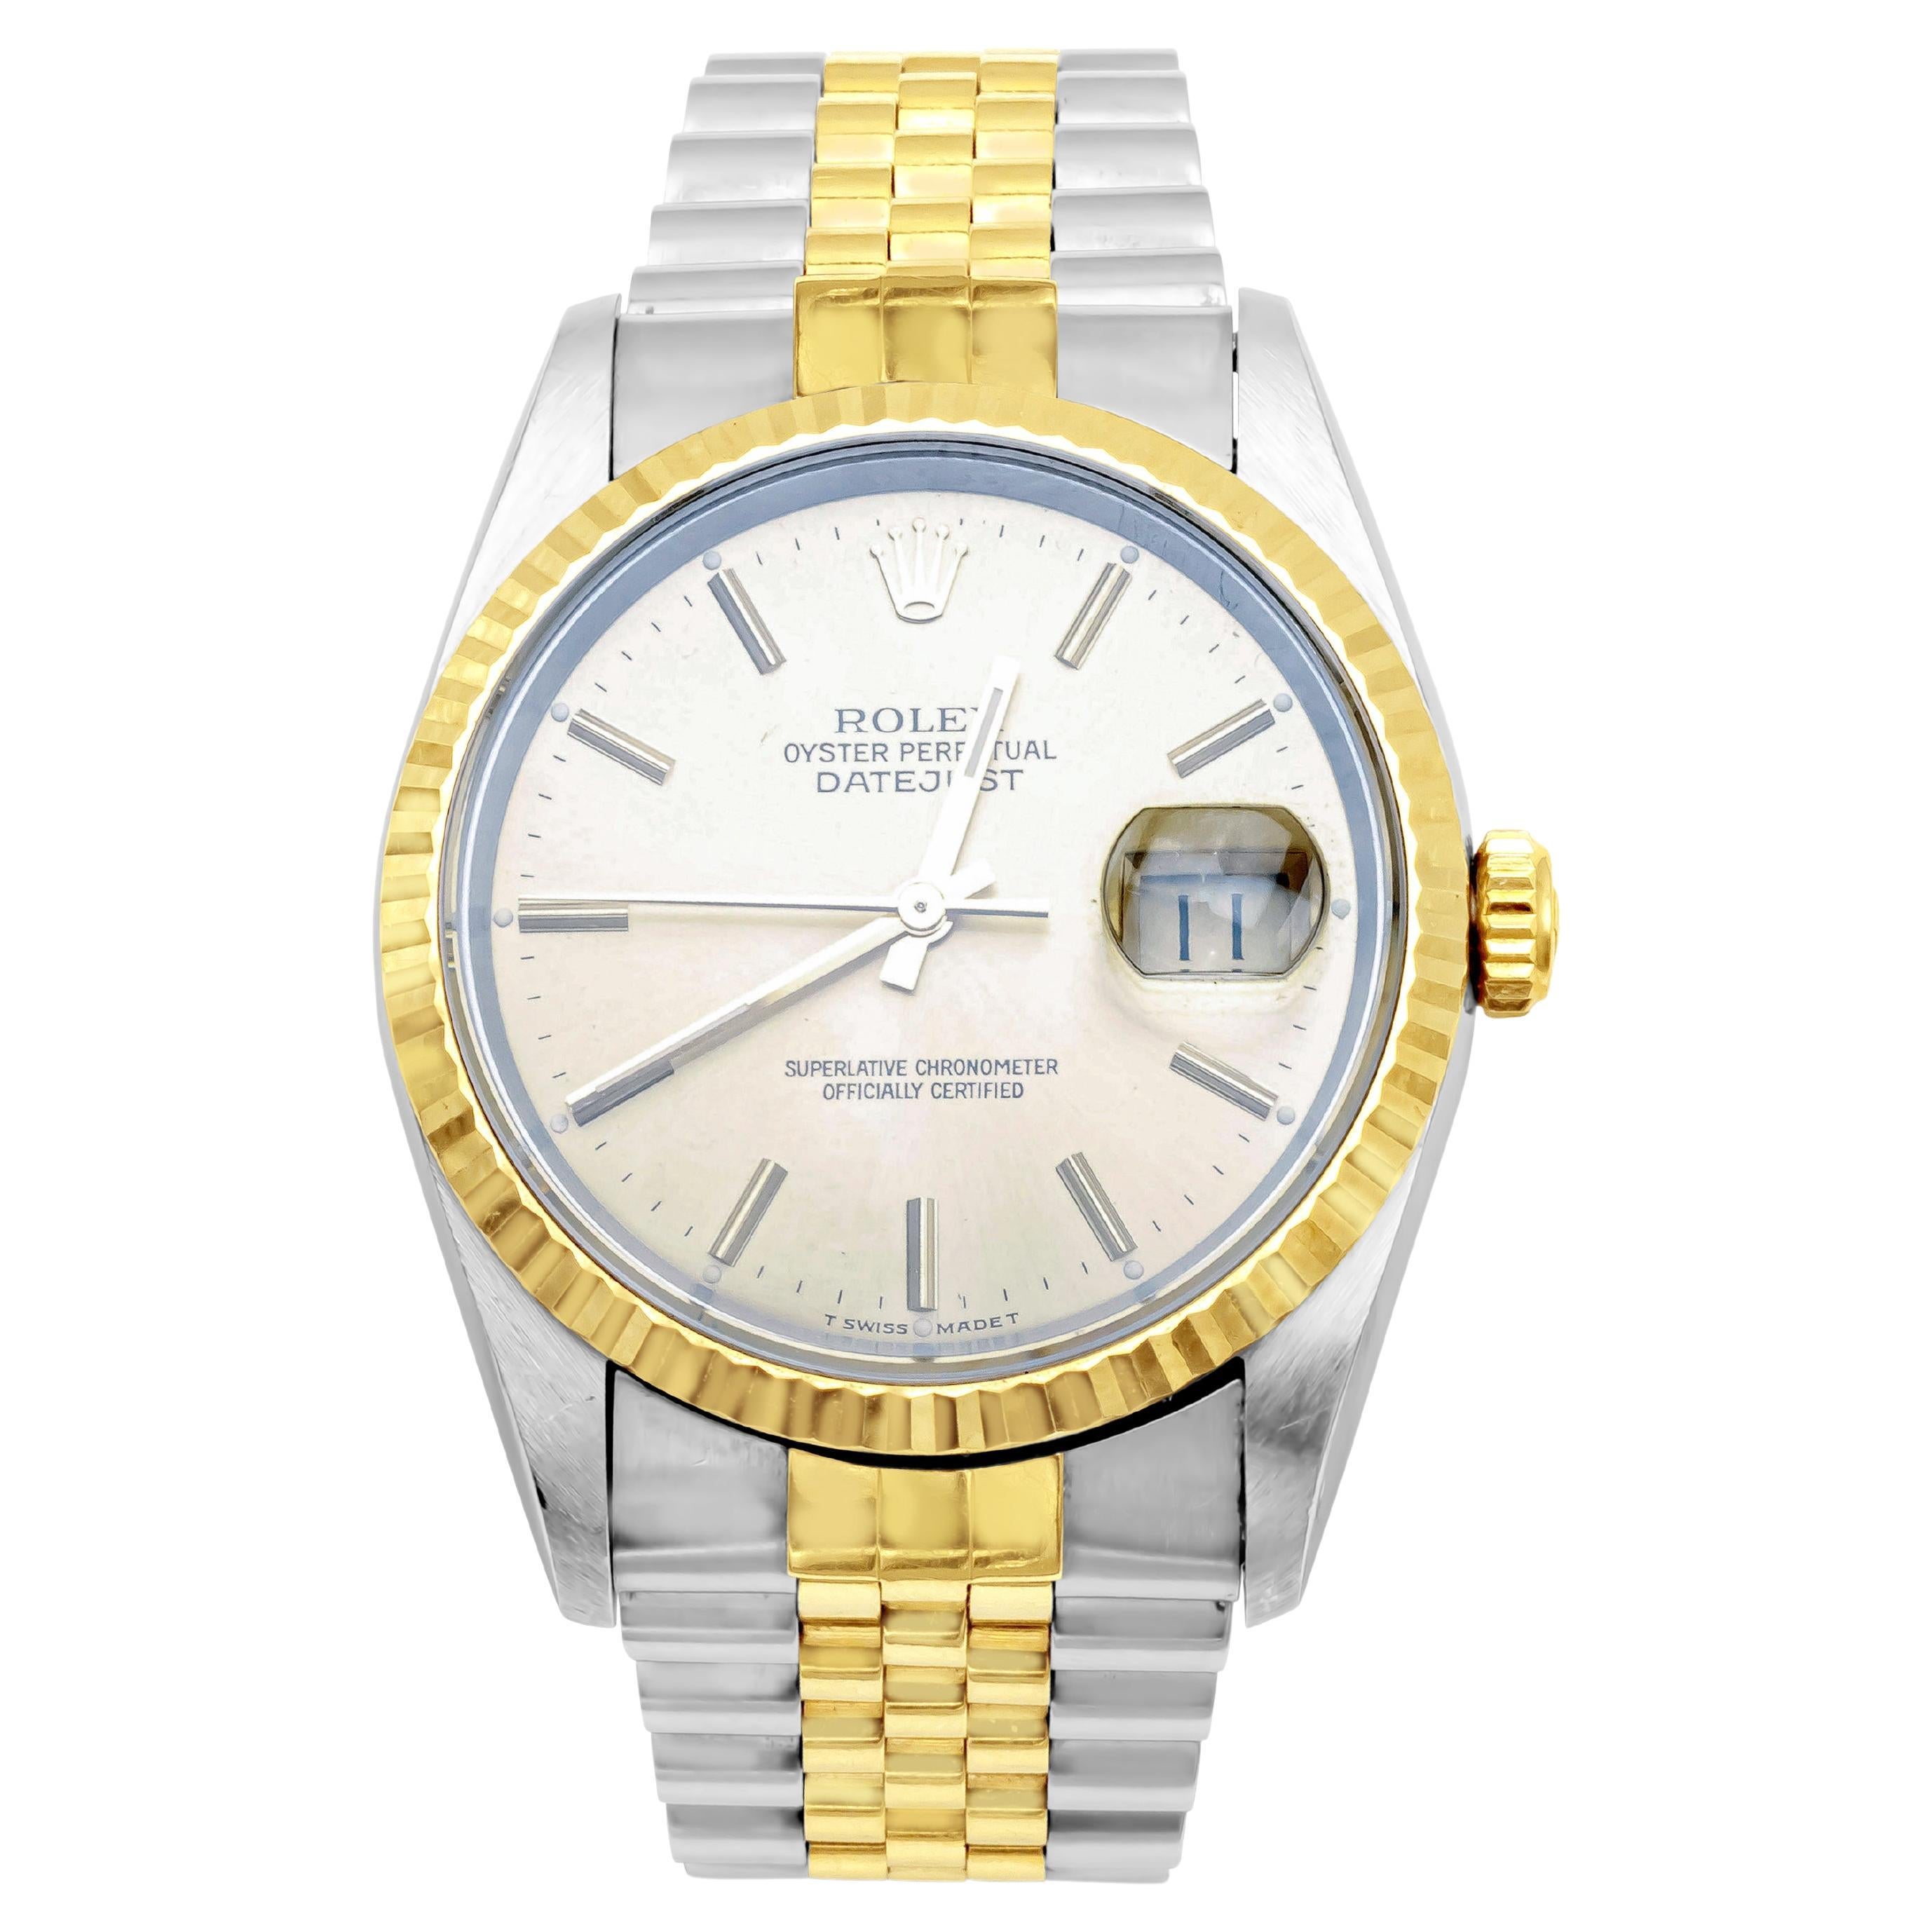 Rolex Datejust 16233 Champagne 18K Yellow Gold and Stainless Steel Men's Watch For Sale